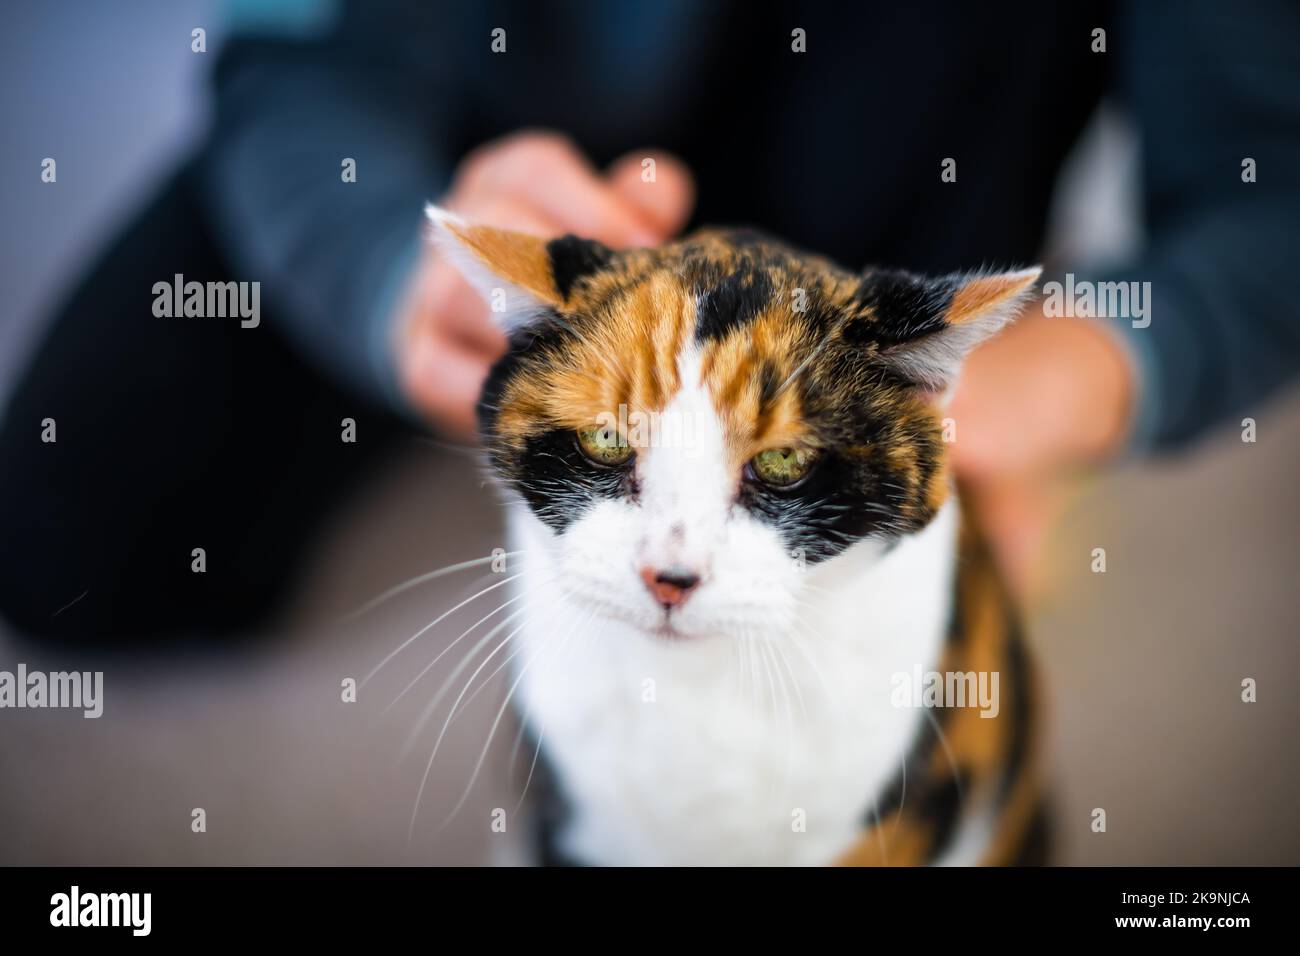 Man pet owner bonding with calico cat by rubbing petting head friends friendship companion pet, adorable kitty Stock Photo